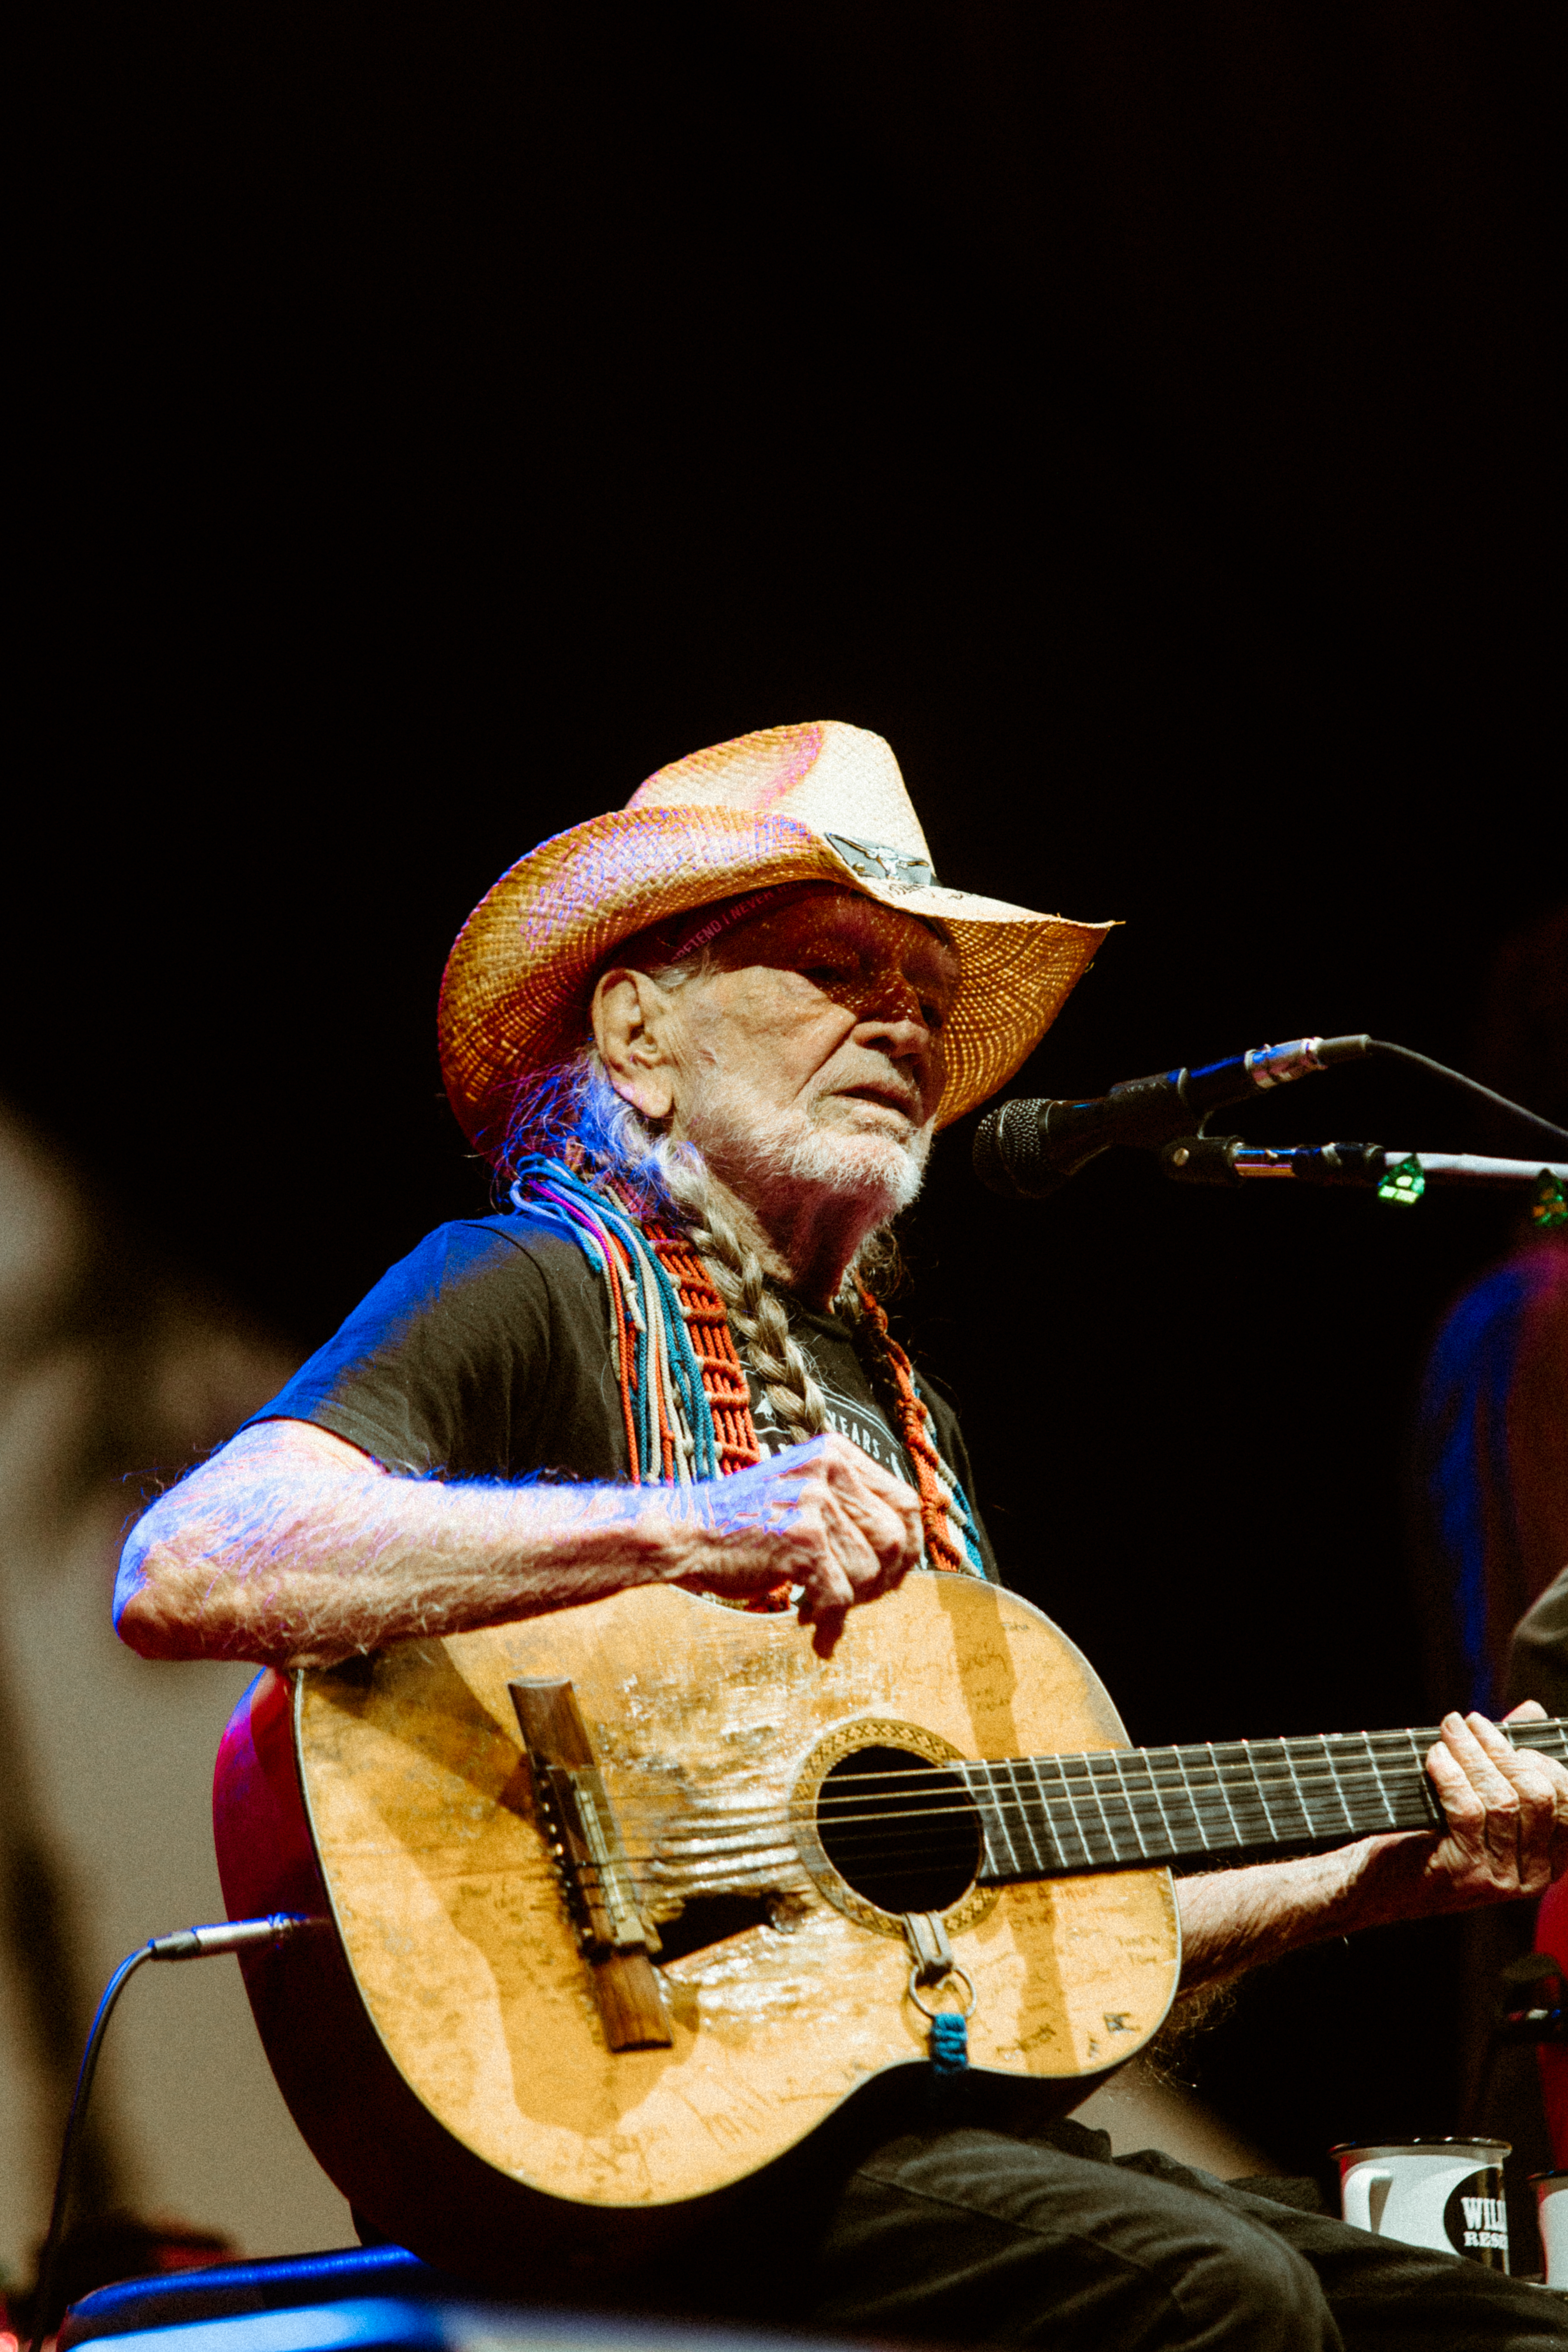 Willie Nelson Shares Heartfelt Message with Uvalde School Shooting Victims’ Parents: “It’s Something You Will Get Through”